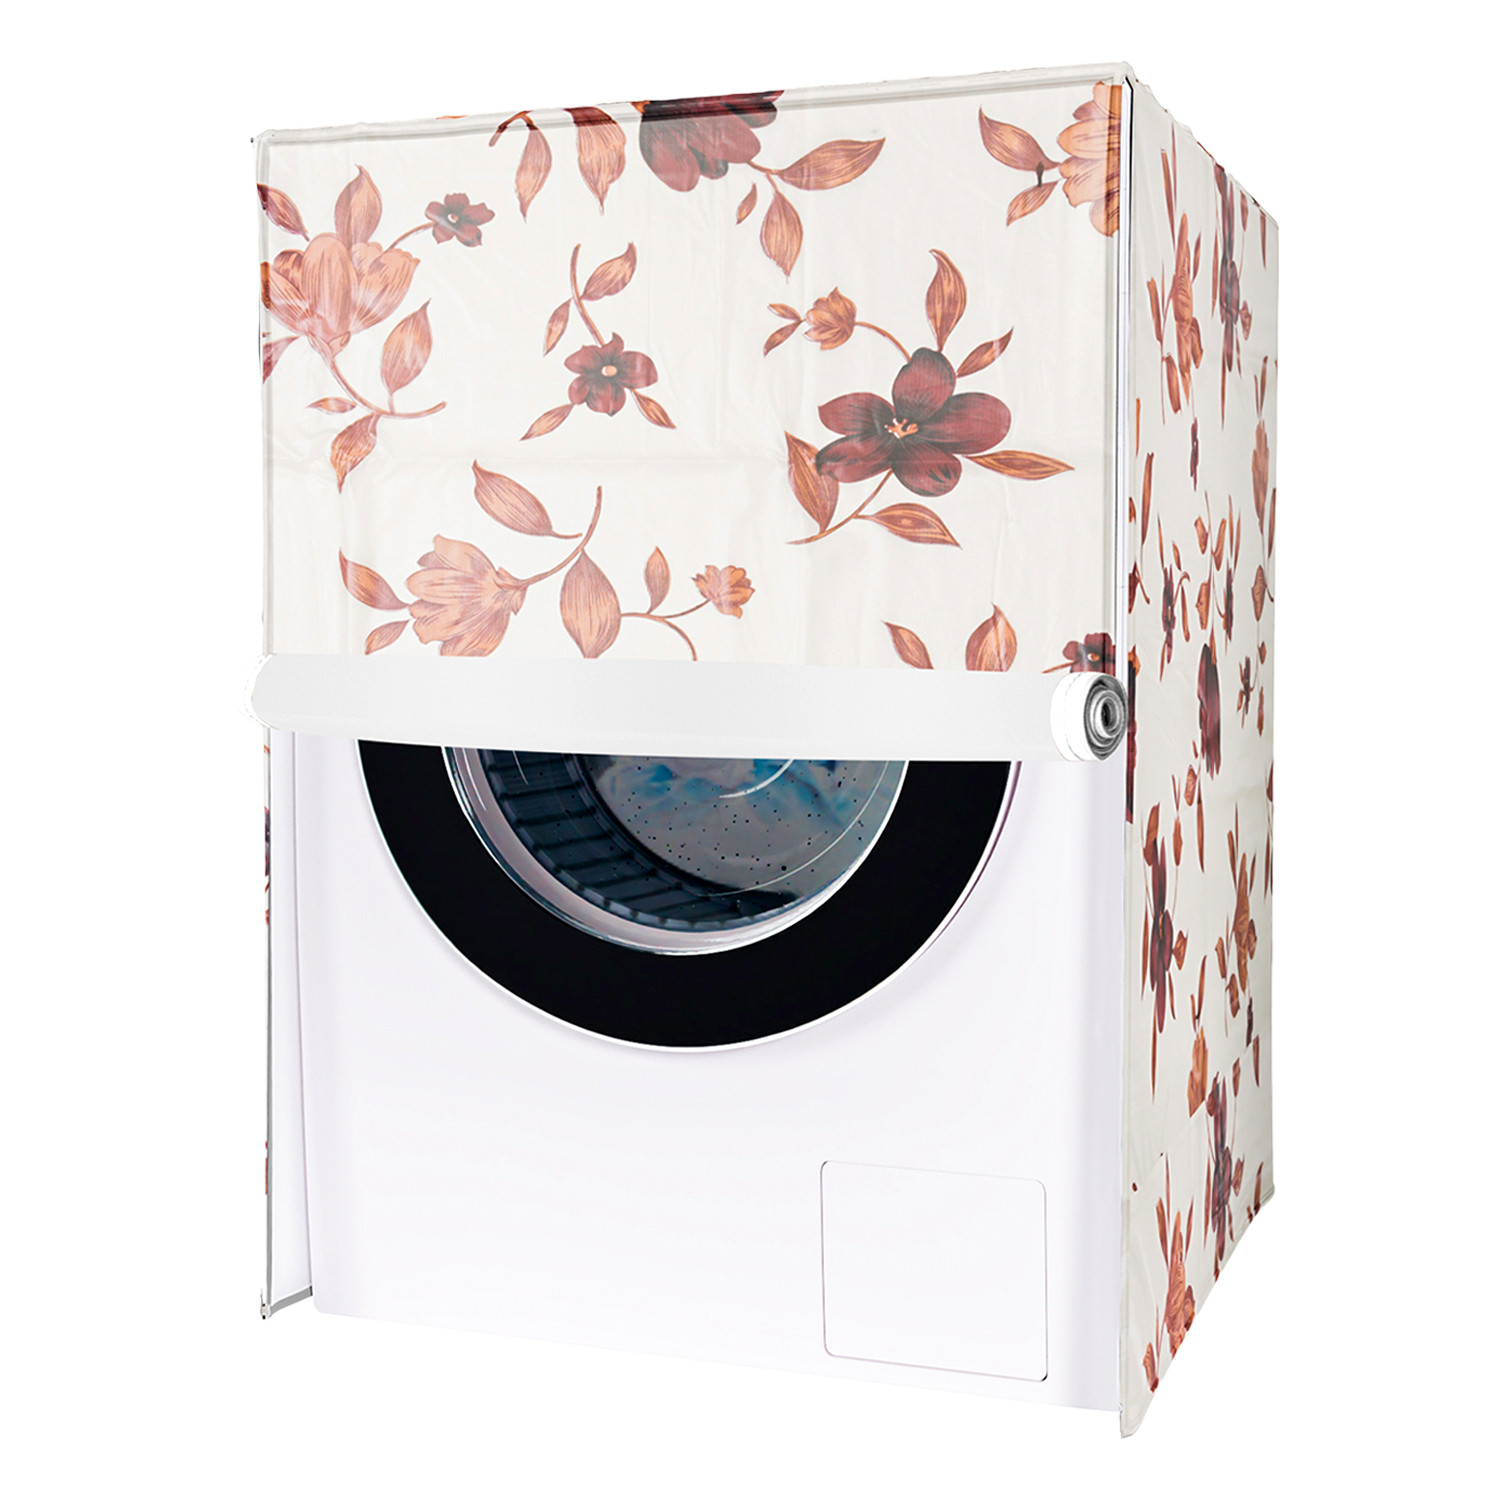 Kuber Industries Washing Machine Cover | Cream Printed Washing Machine Cover | Soft PVC | Front Load Washing Machine Cover | Cream